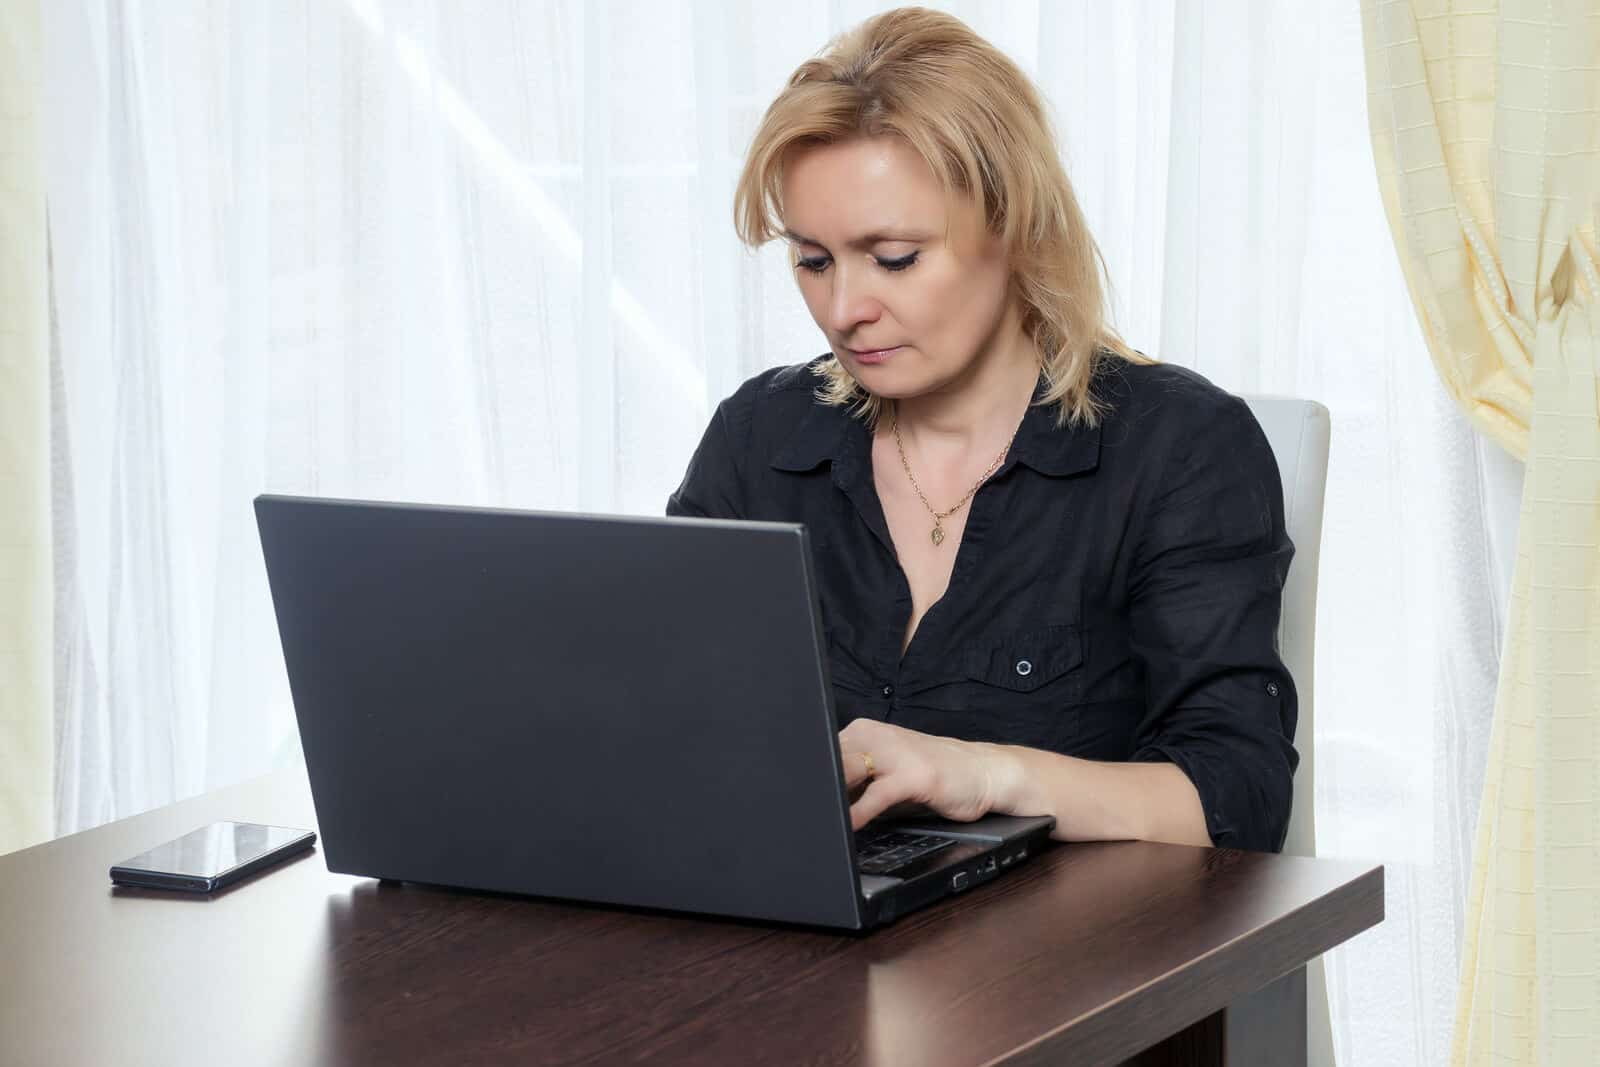 Woman Working on Laptop